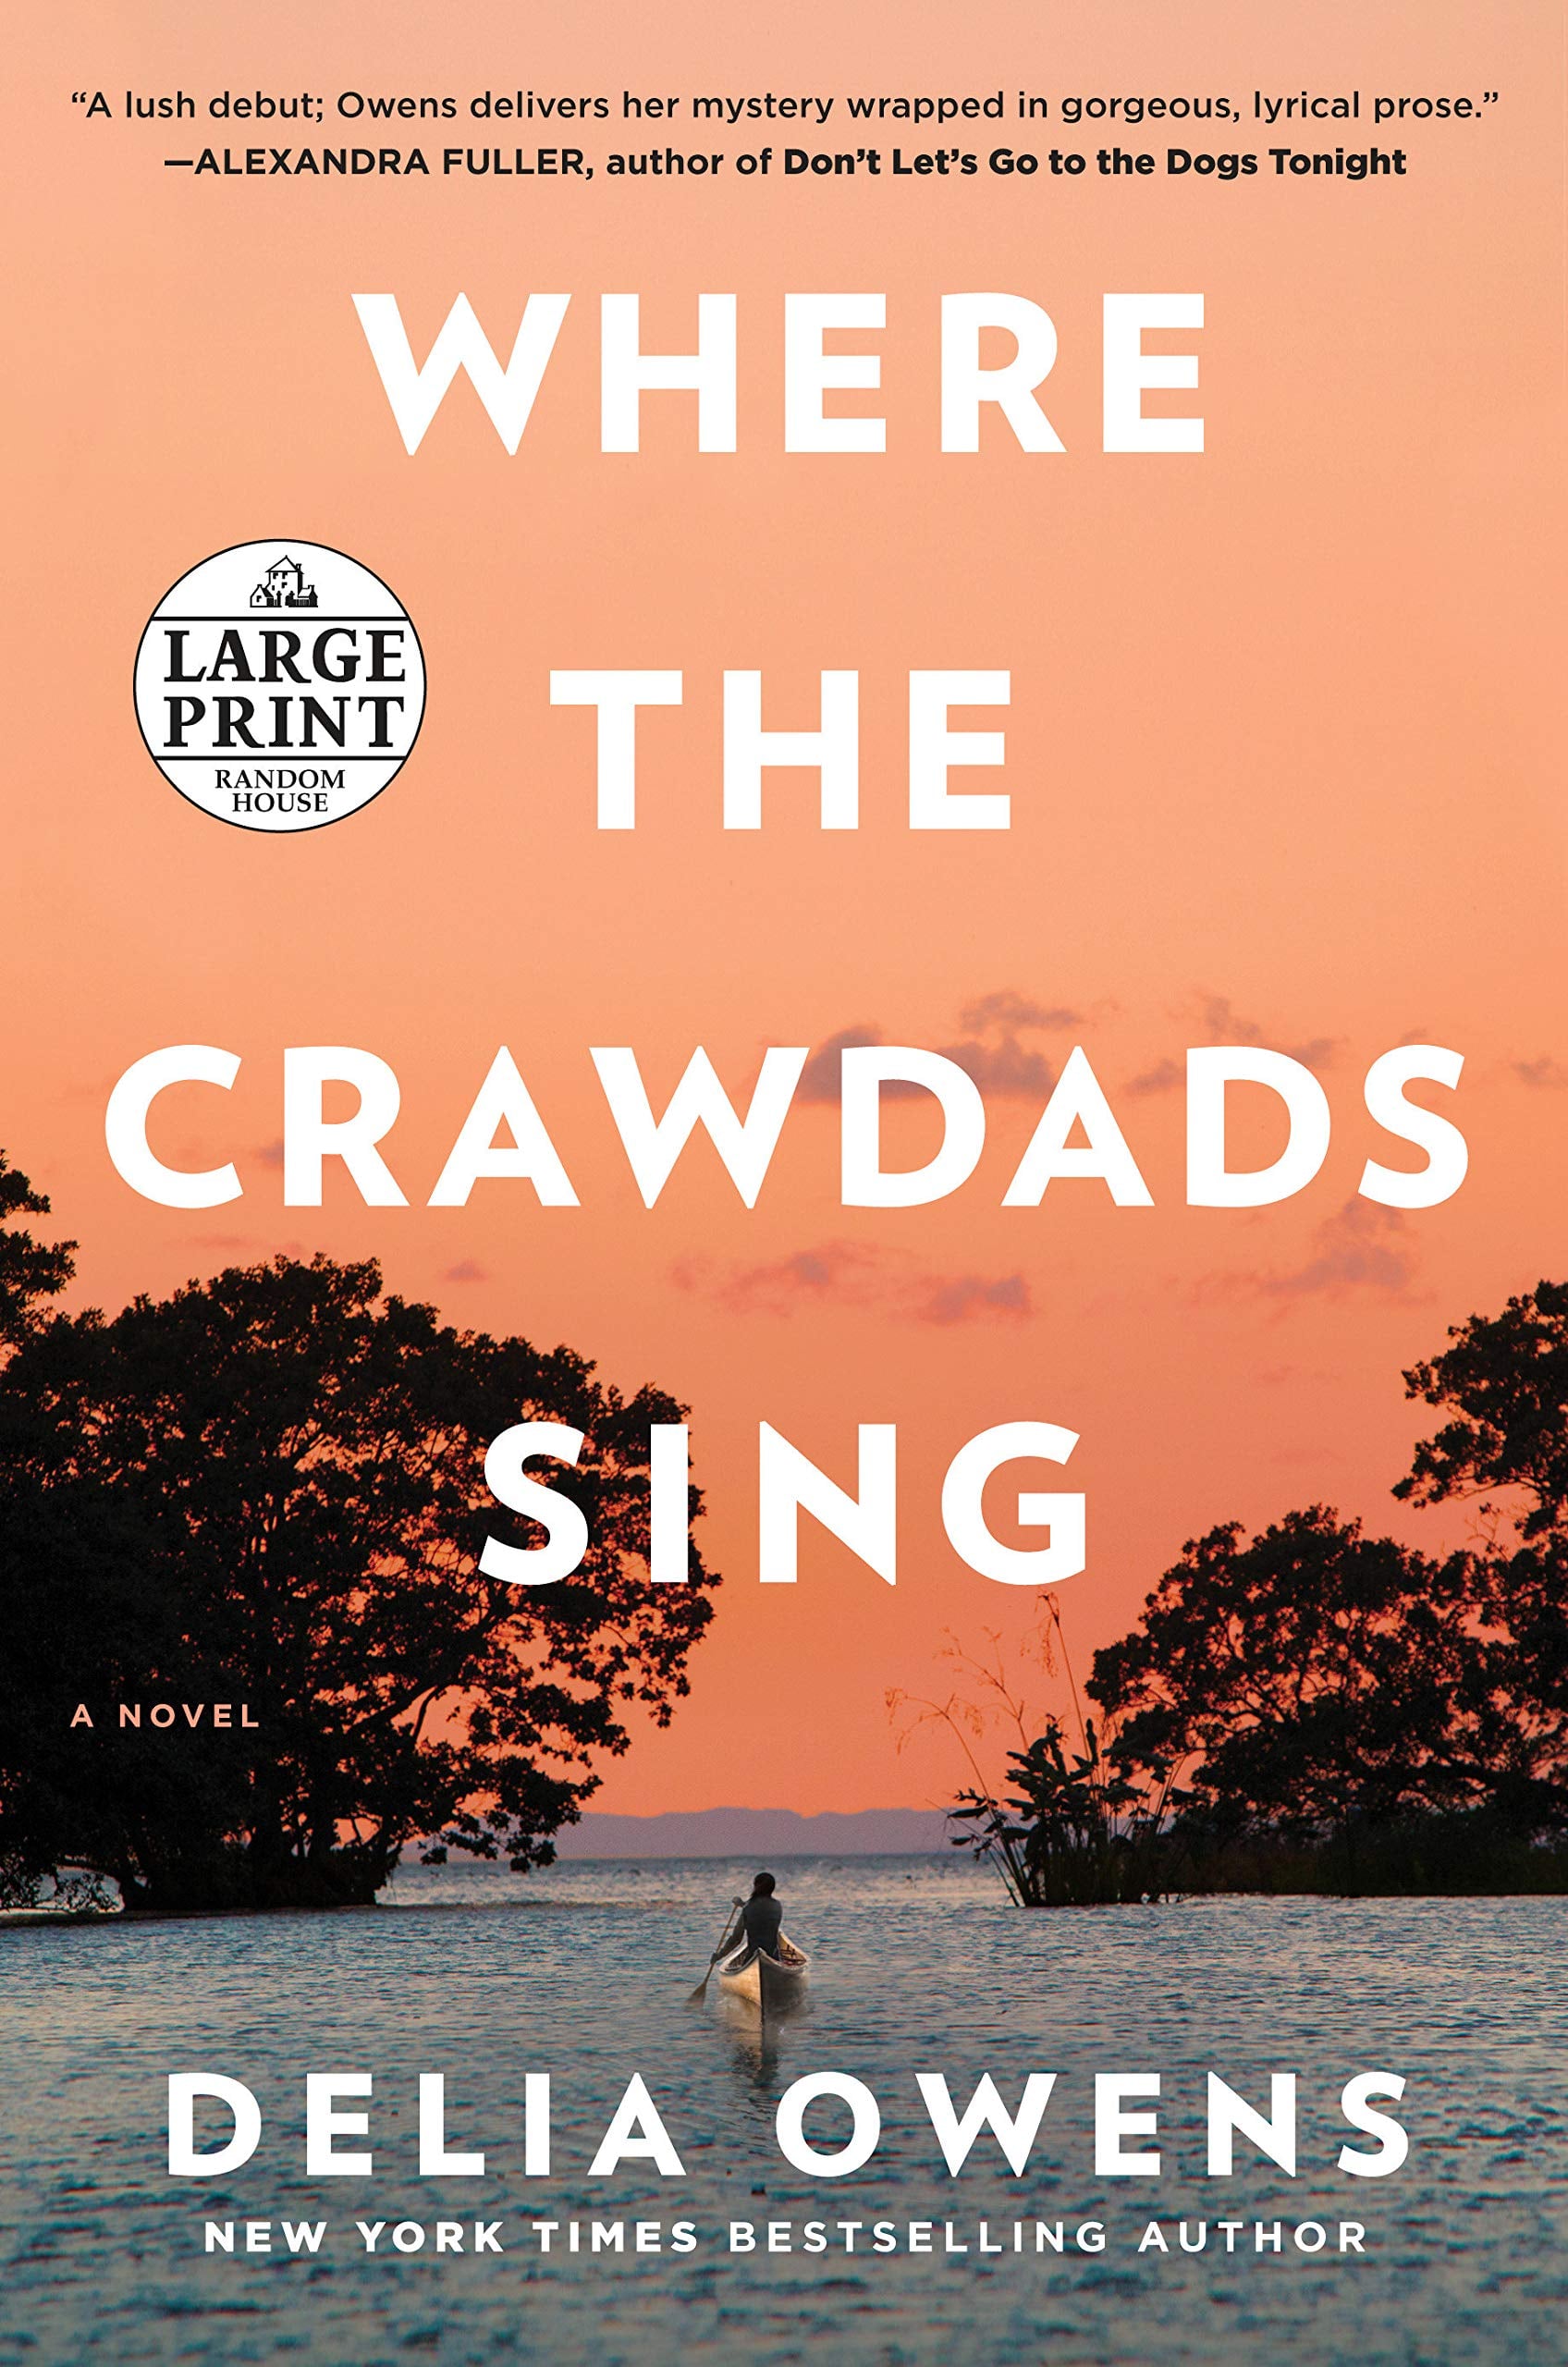 Where the Crawdads Sing book spoilers